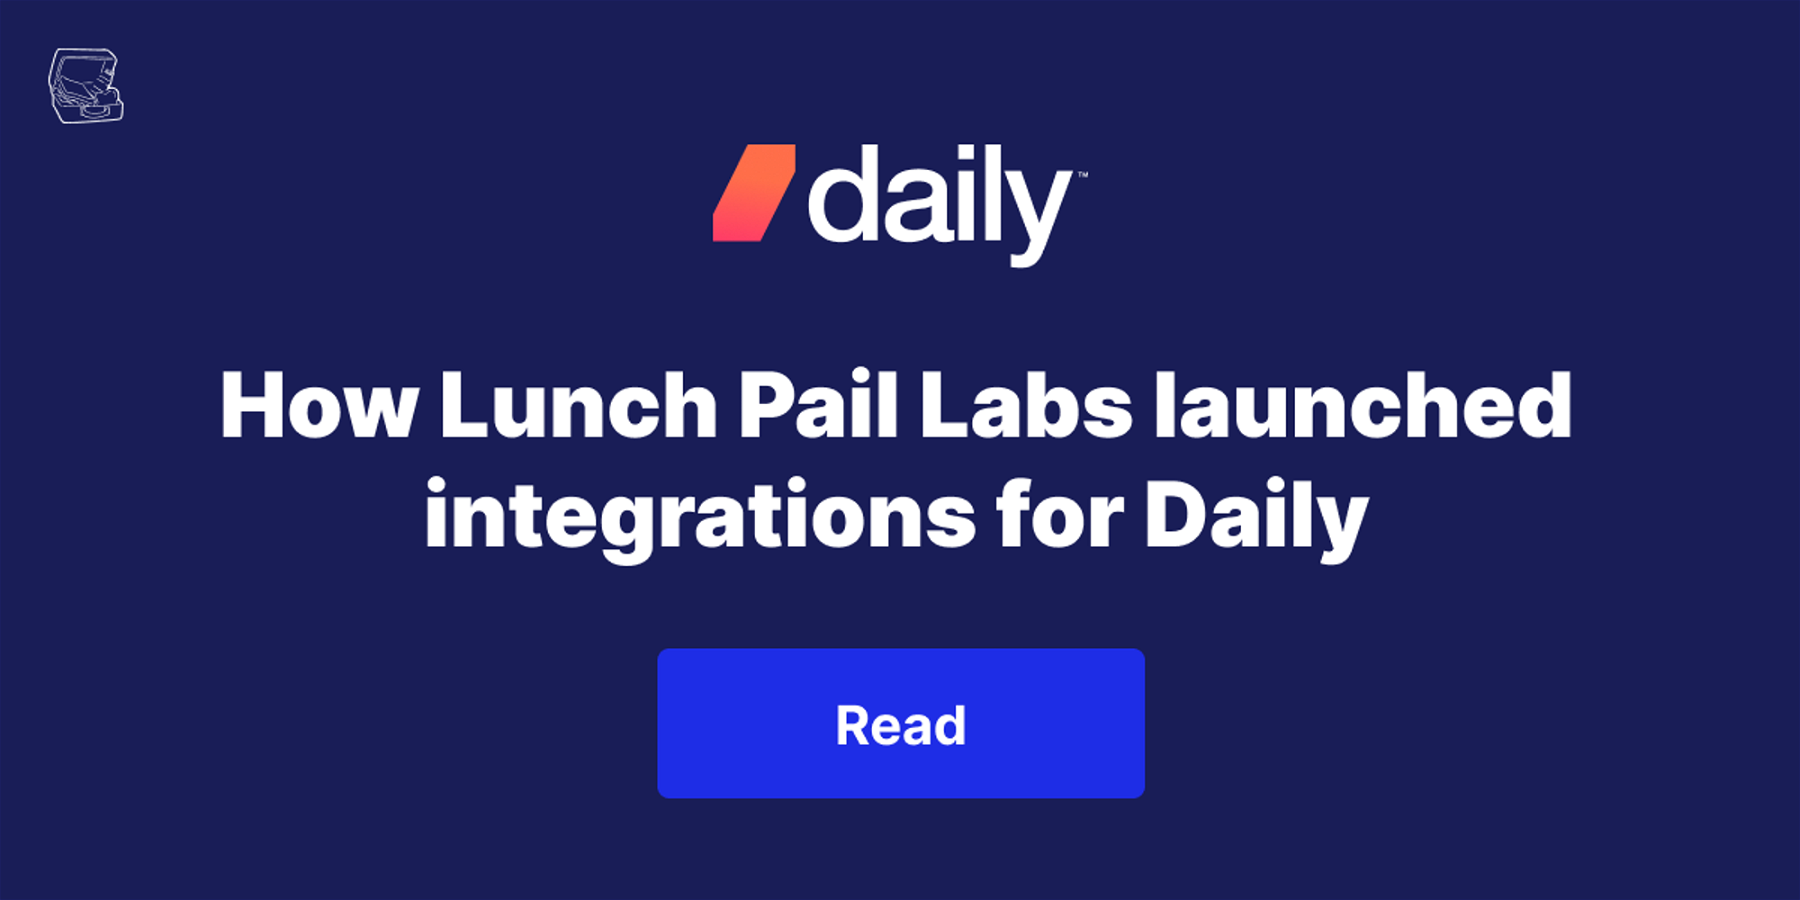 How Lunch Pail Labs launched integrations for Daily